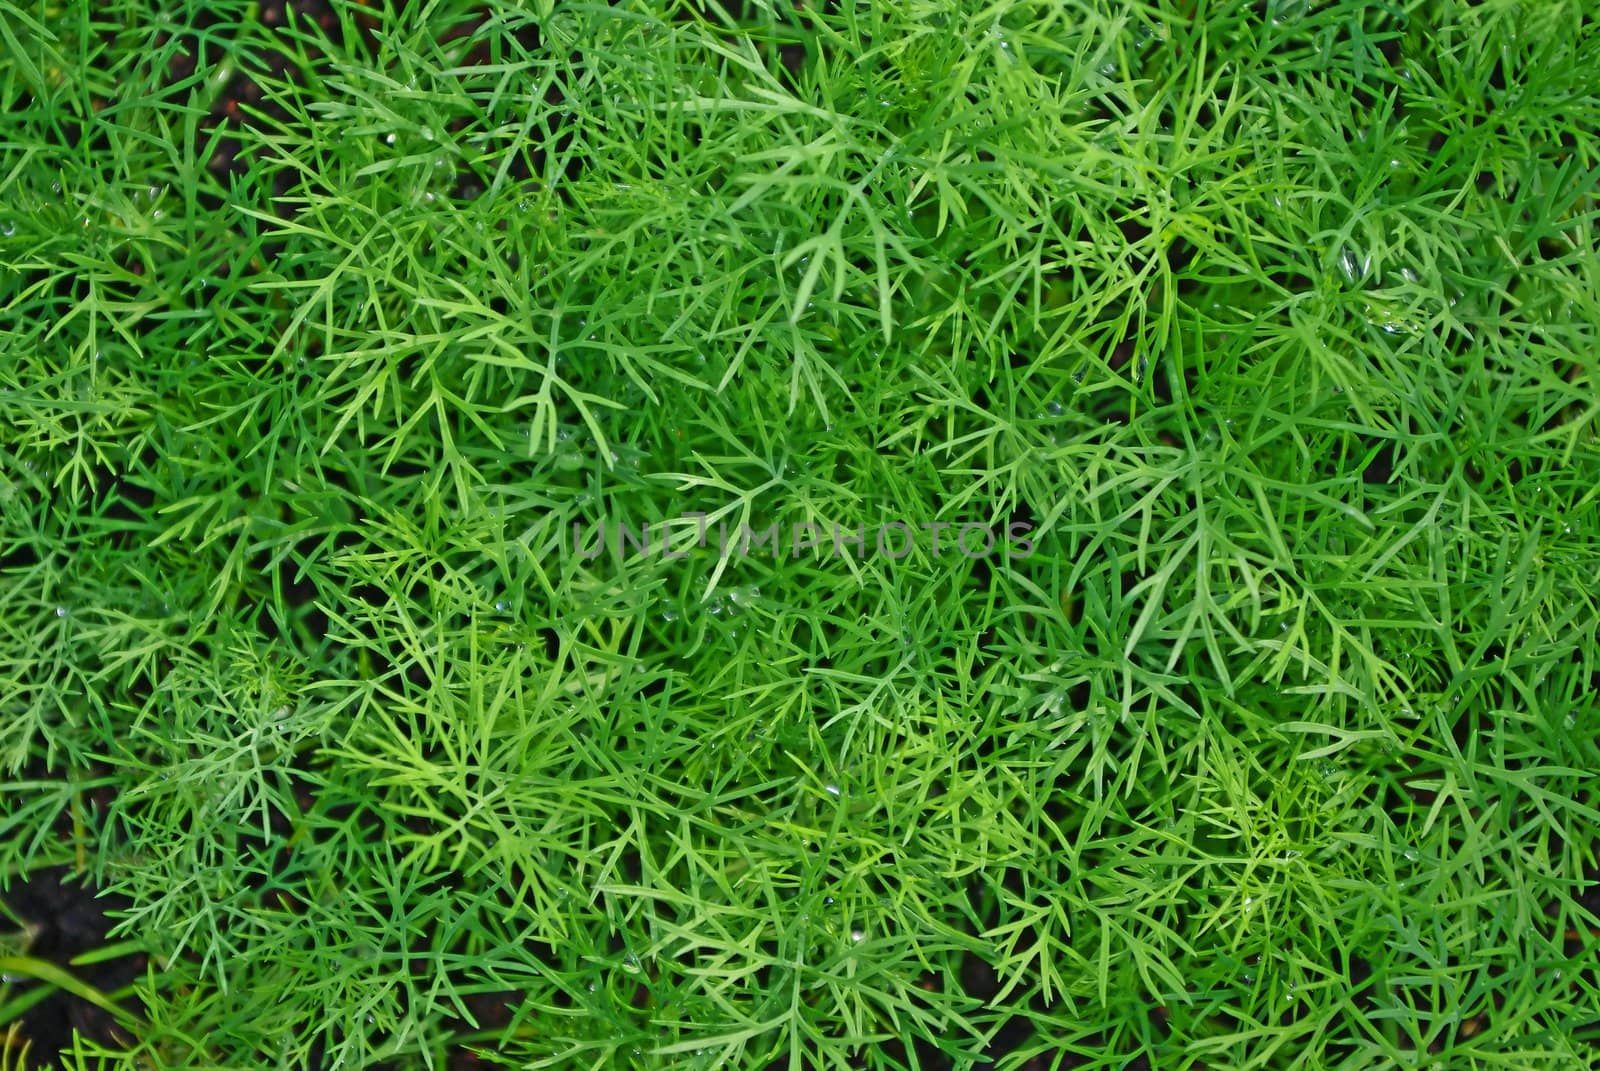 Growing dill natural background by Vitamin